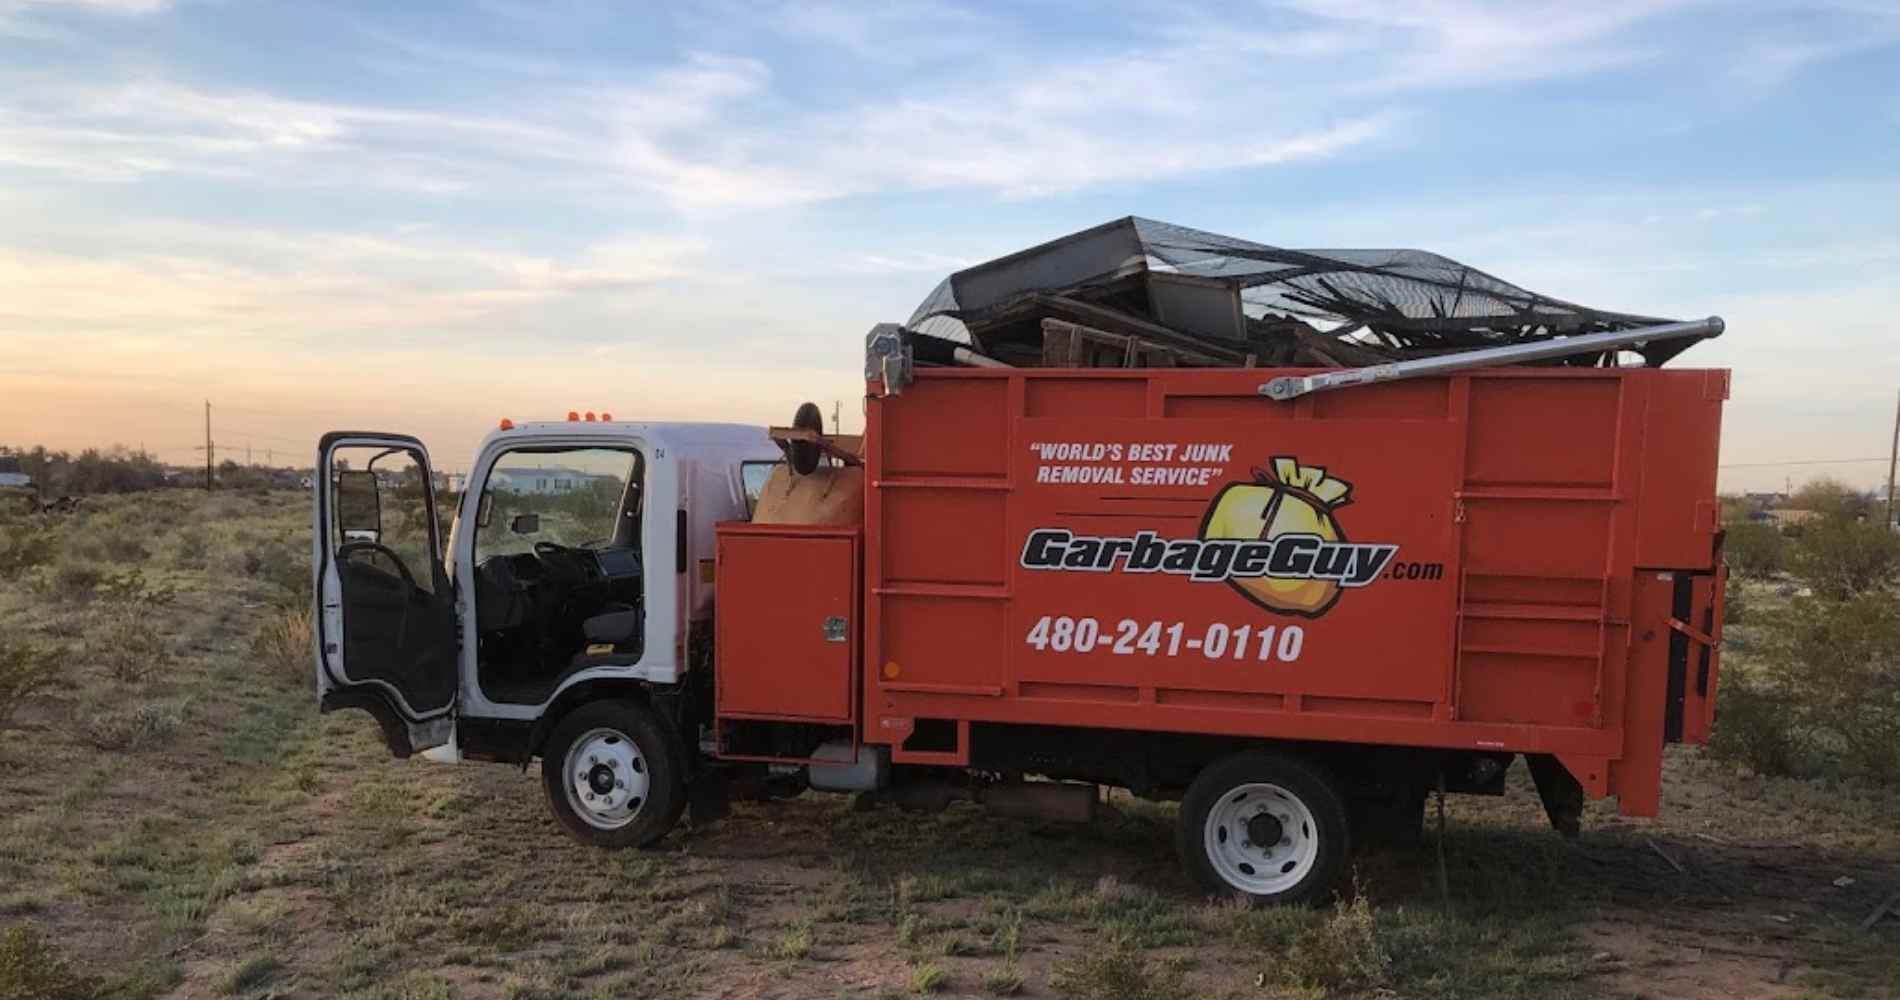 #1 for Junk Removal in Goodyear, AZ with Over 1200 5-Star Reviews!